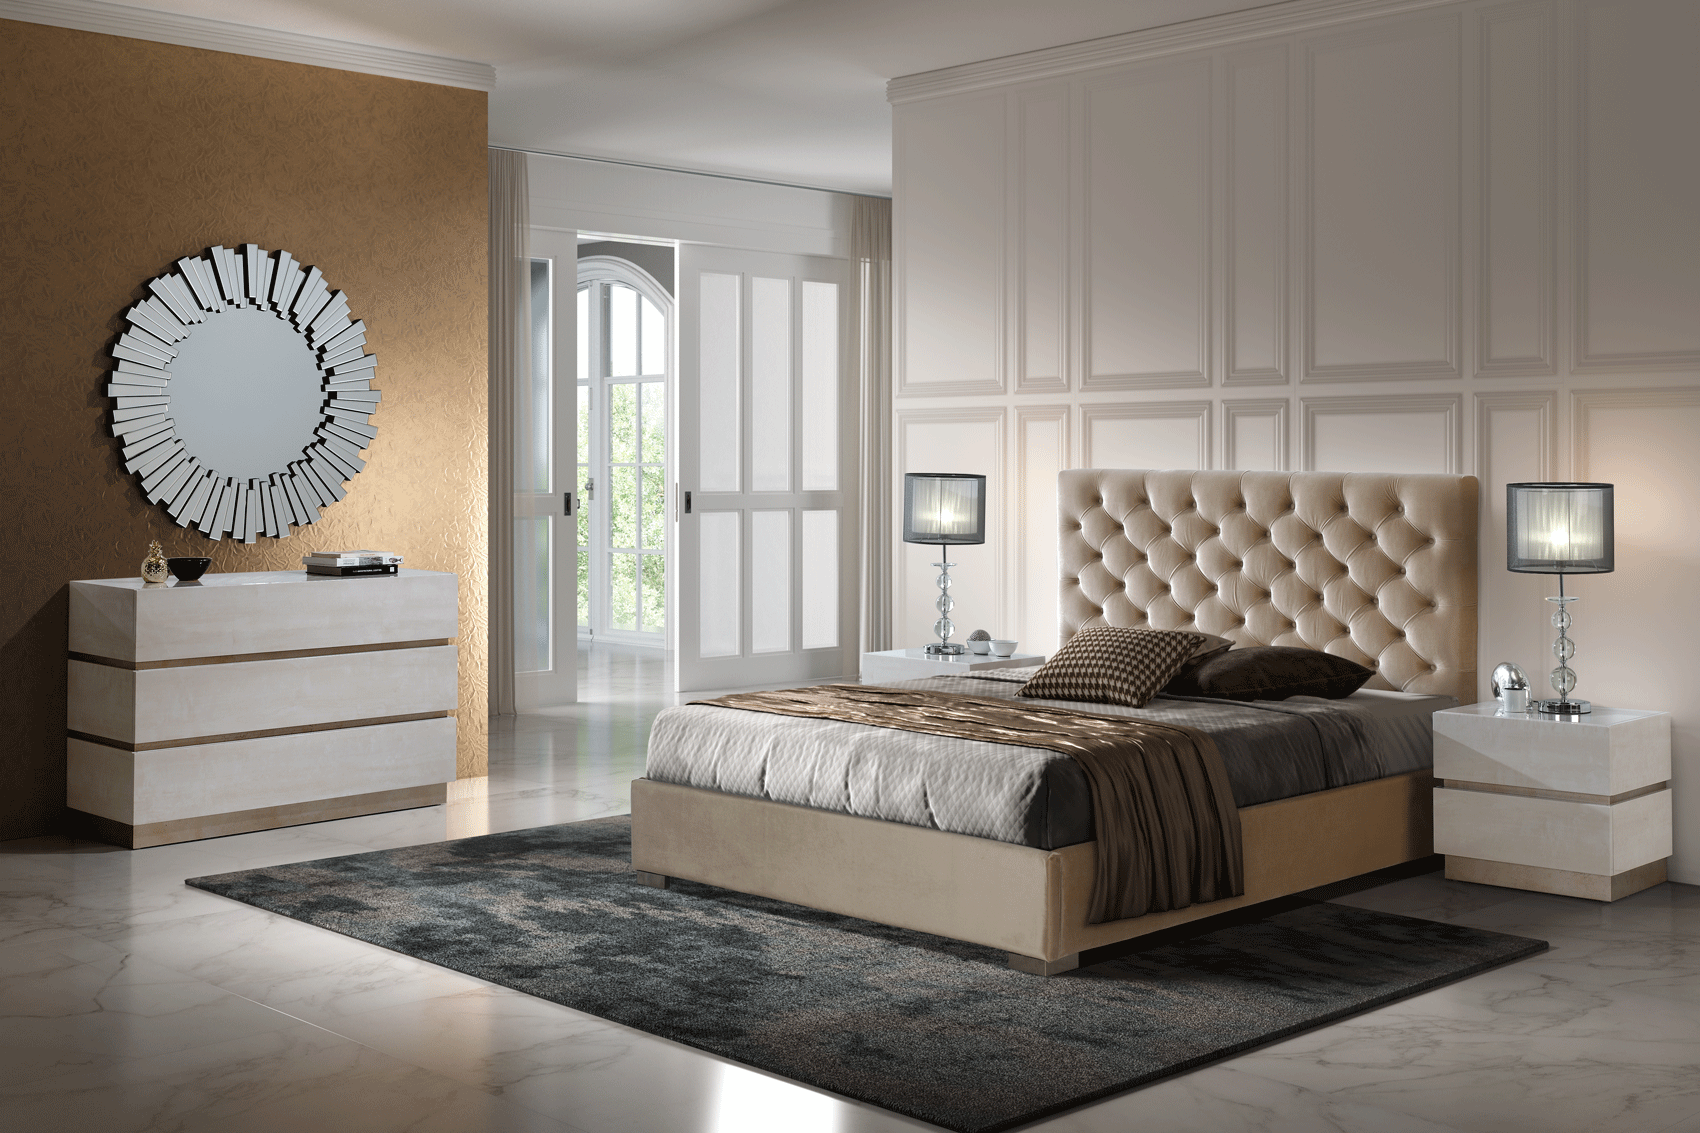 Bedroom Furniture Beds with storage 852 Gala Bed, M-151, C-151, E-100